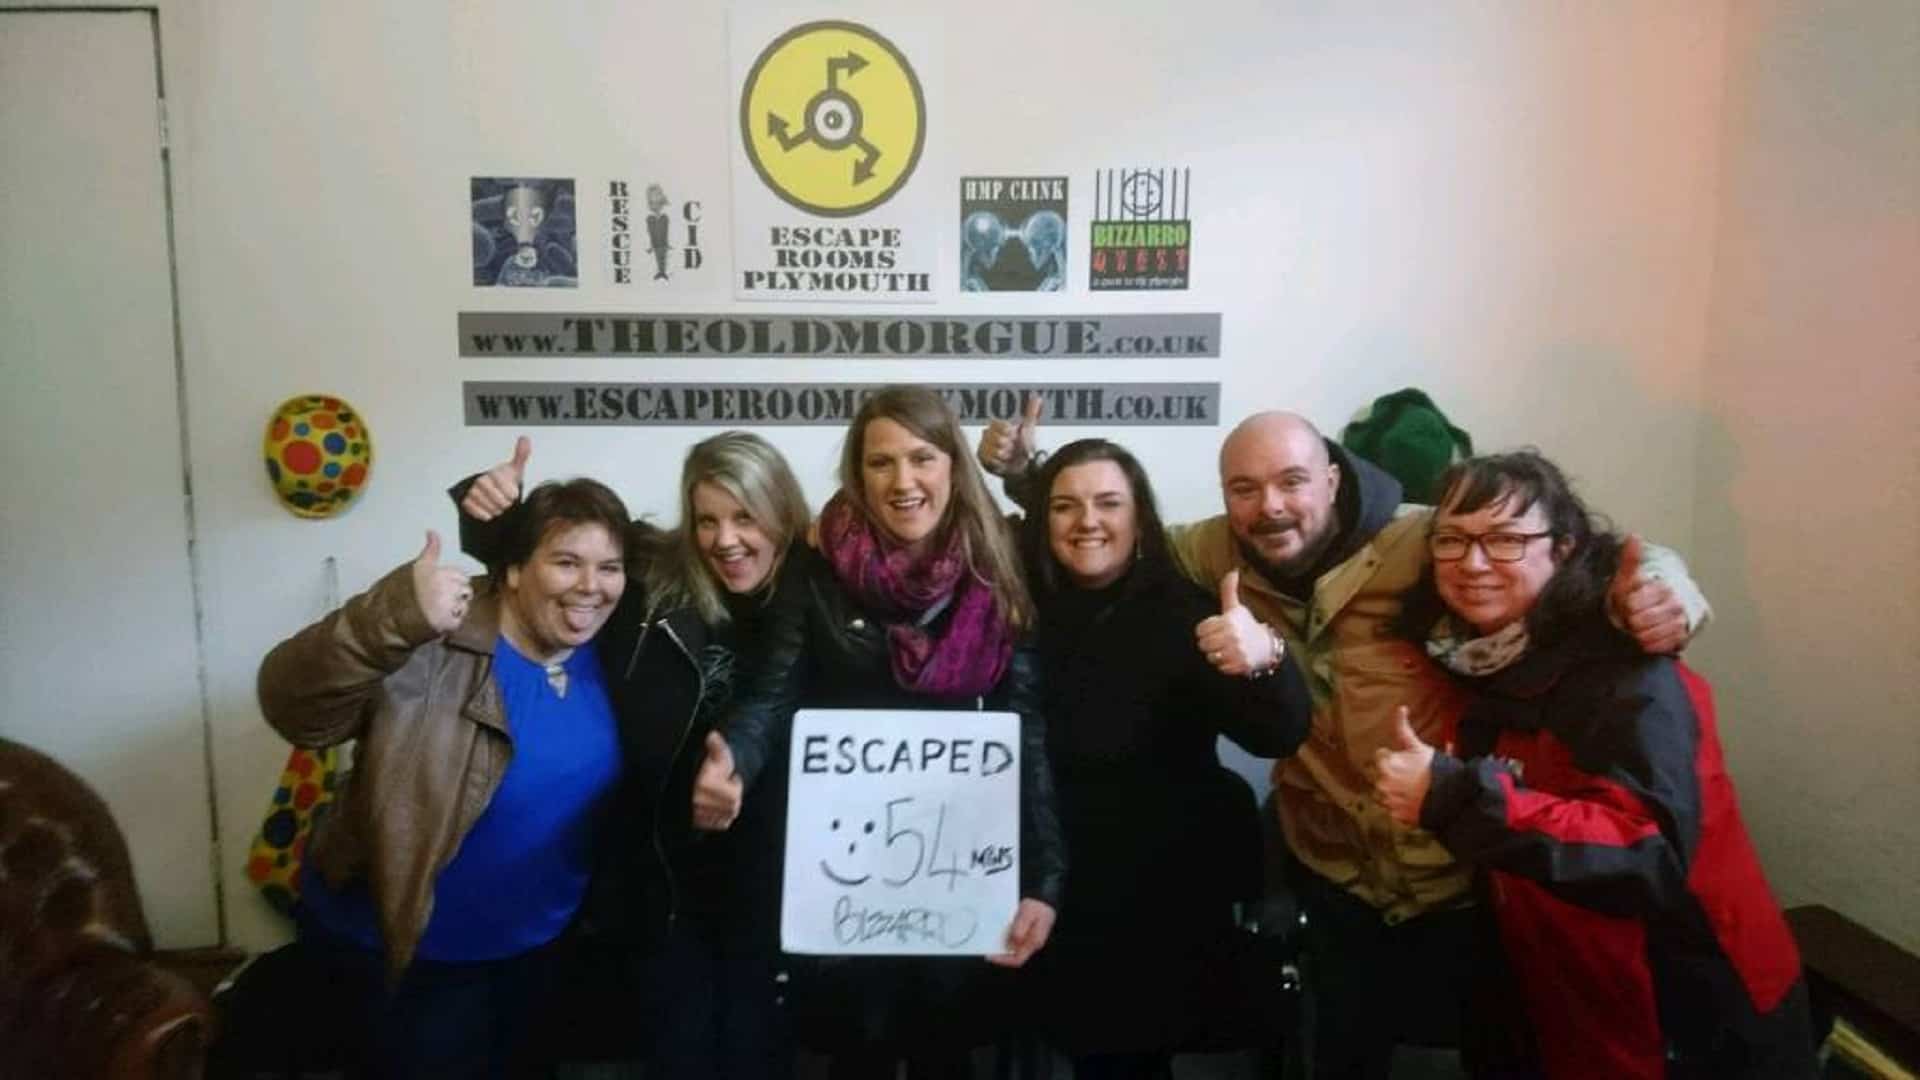 Escape Rooms Plymouth in UK